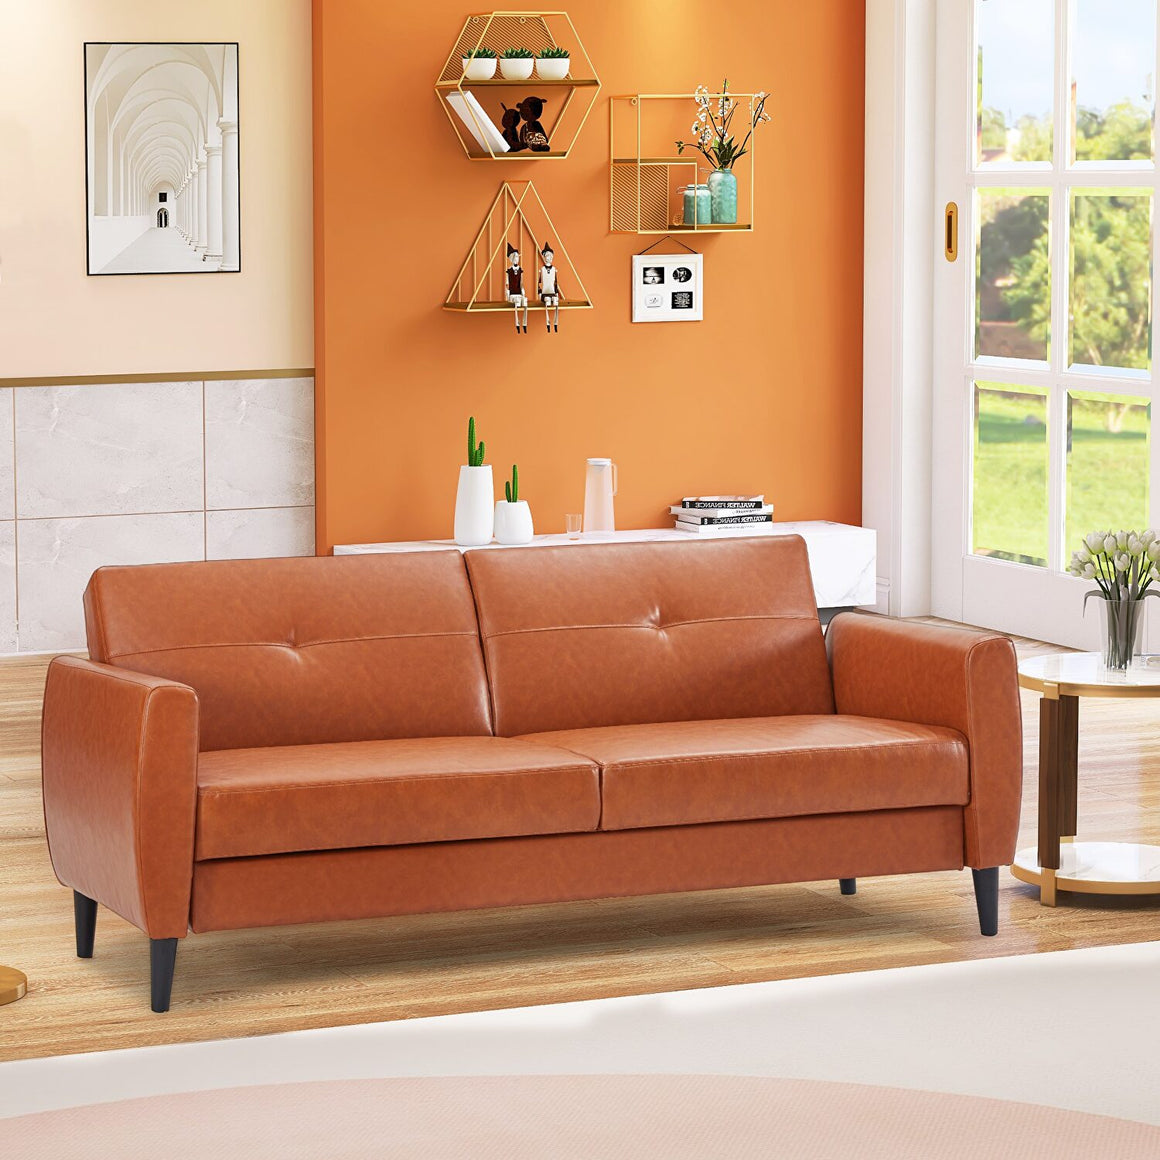 River Quinn Modern Convertible Sofa Bed with Storage Box in Cinnamon